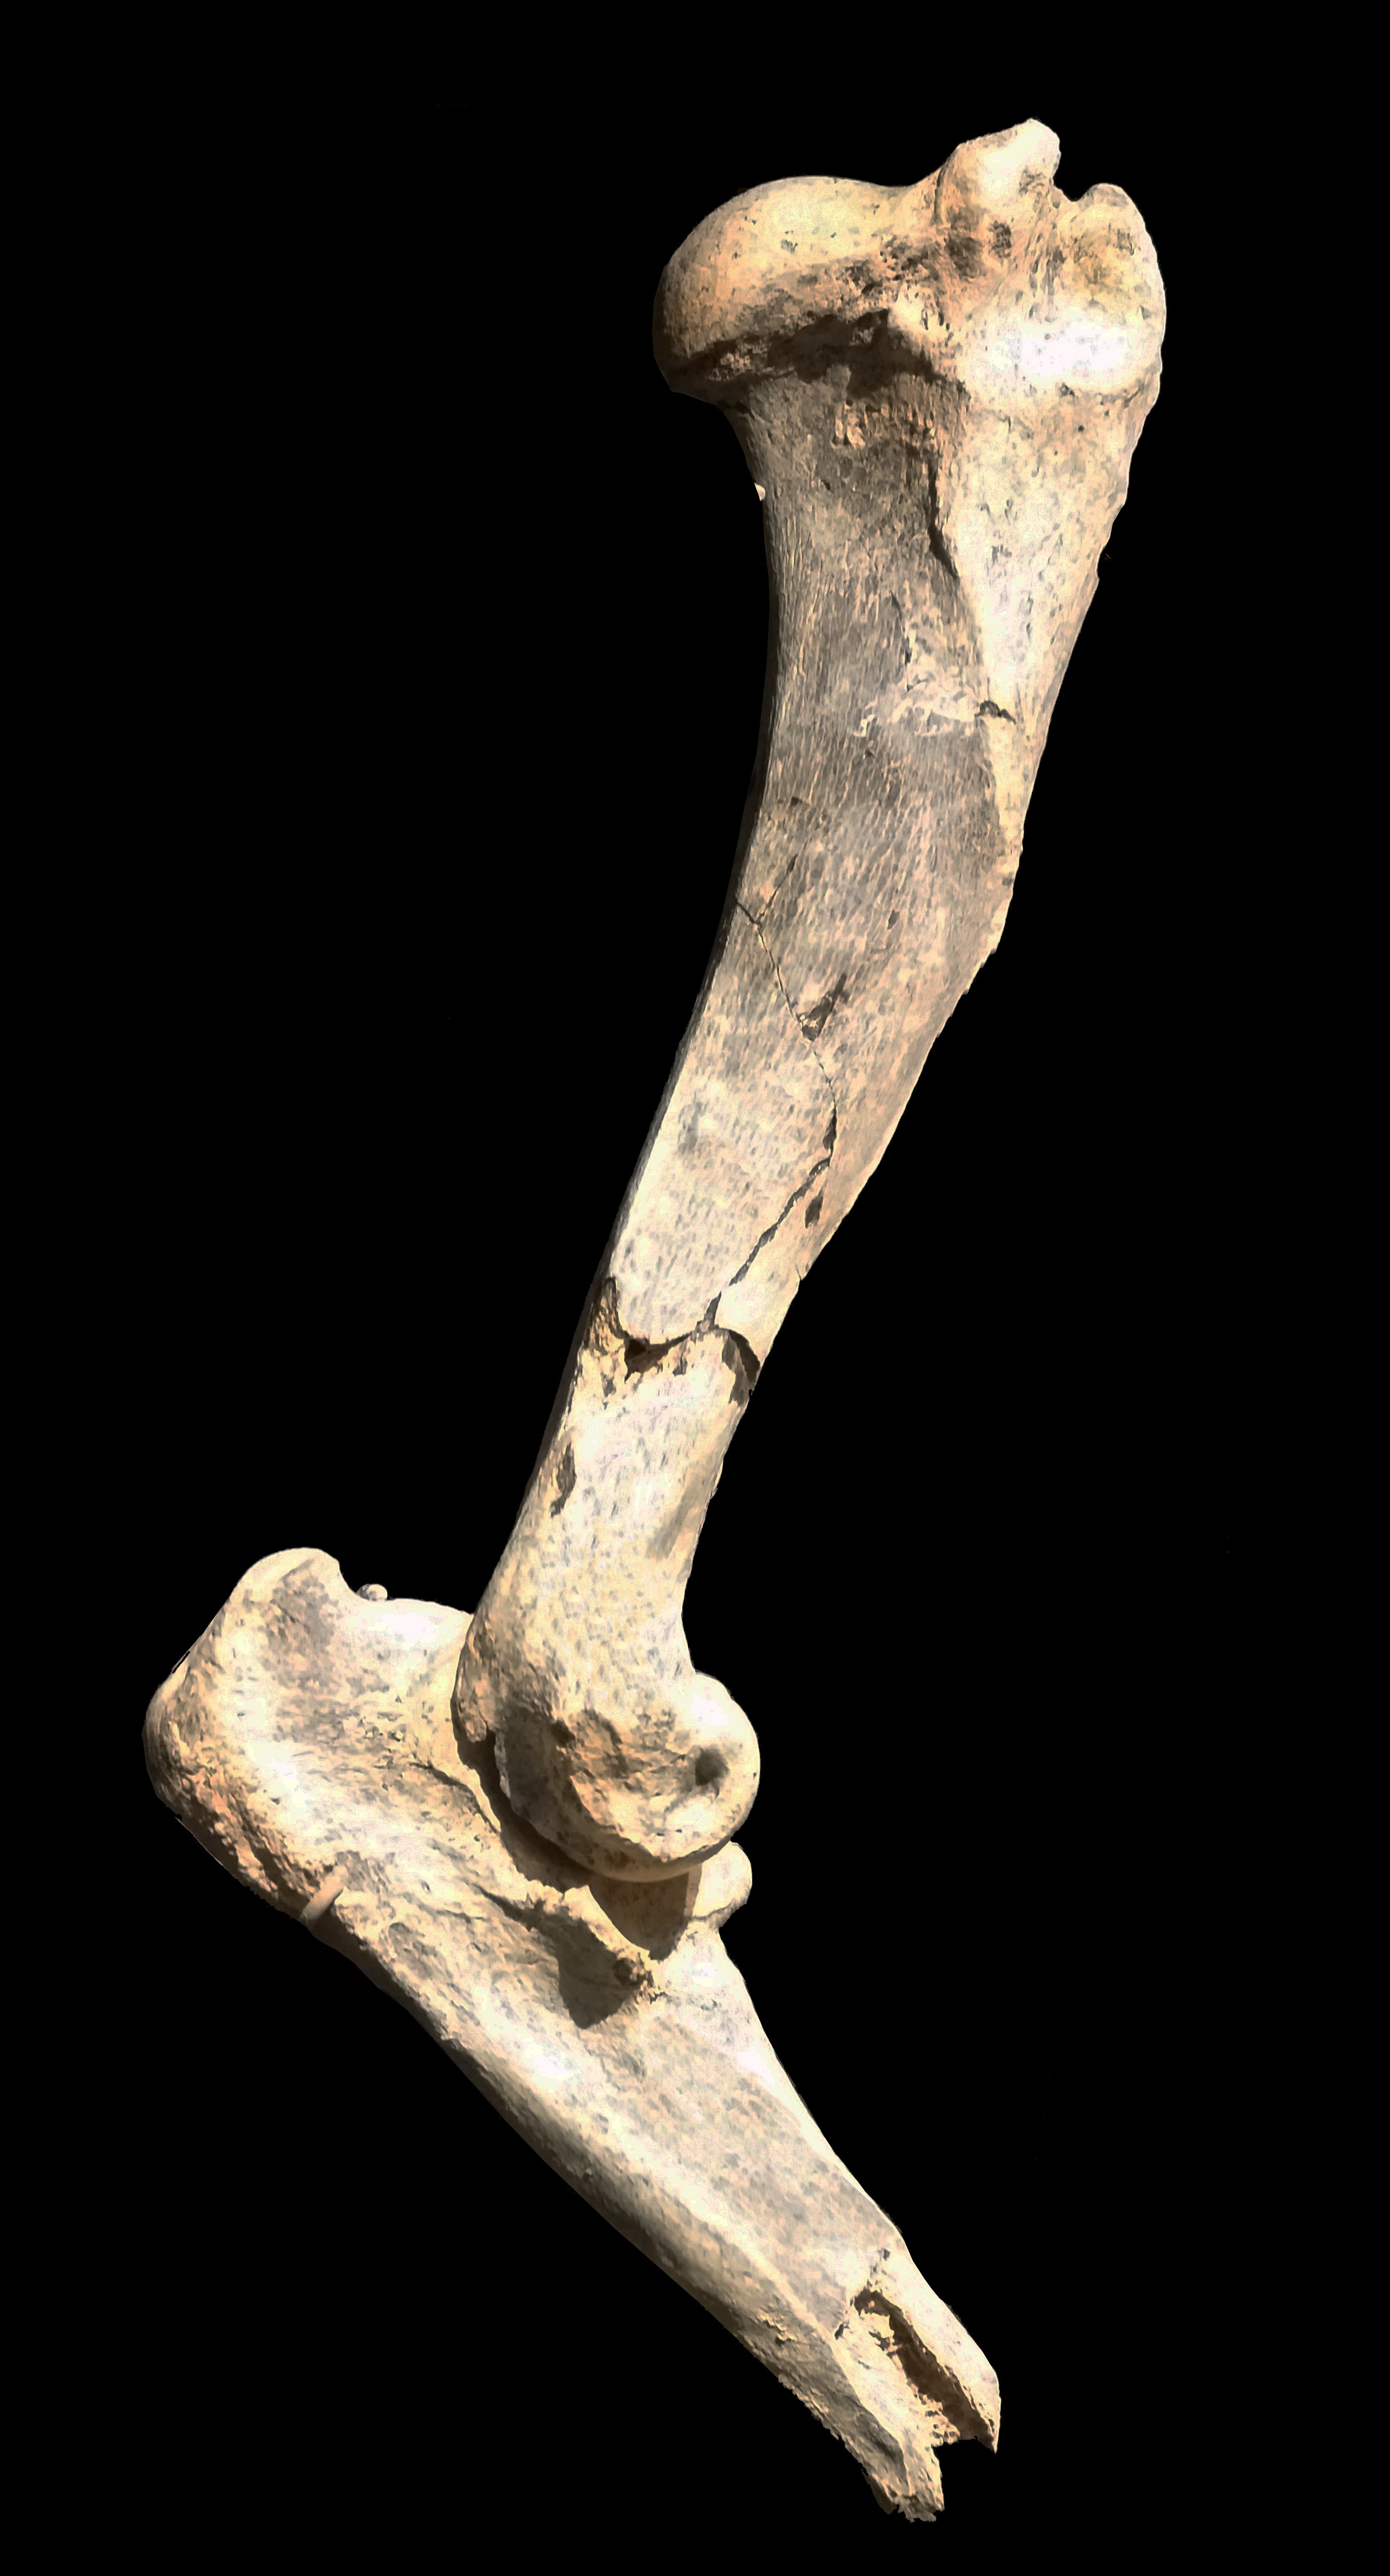 The humerus bone excavated from north central Oregon, which is now on display in the University of Oregon Museum of Natural and Cultural History